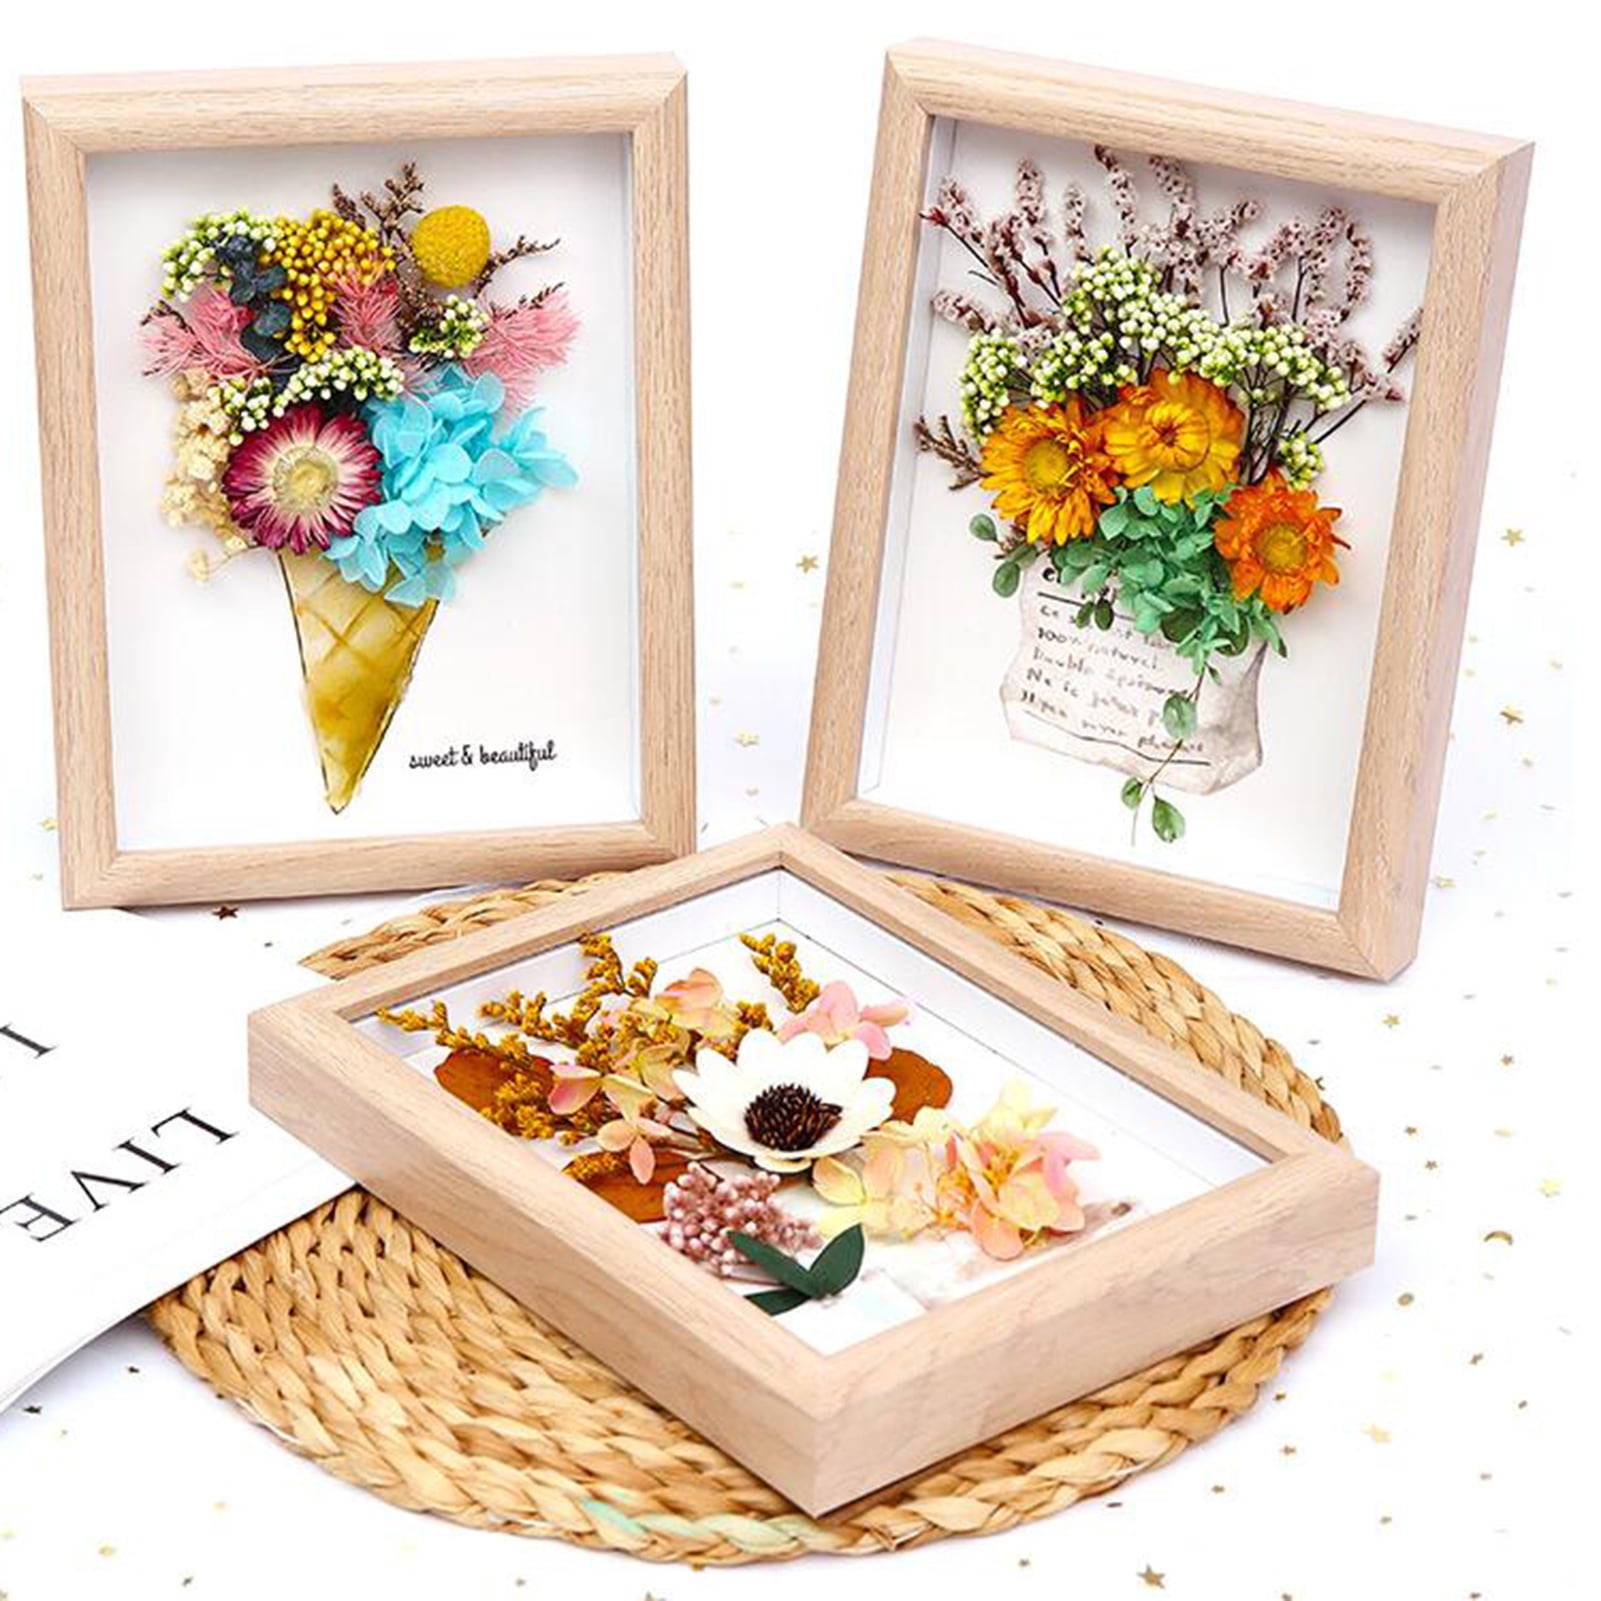 Hesroicy Photo Frame 3D Stable Wooden Dried Flower DIY Picture